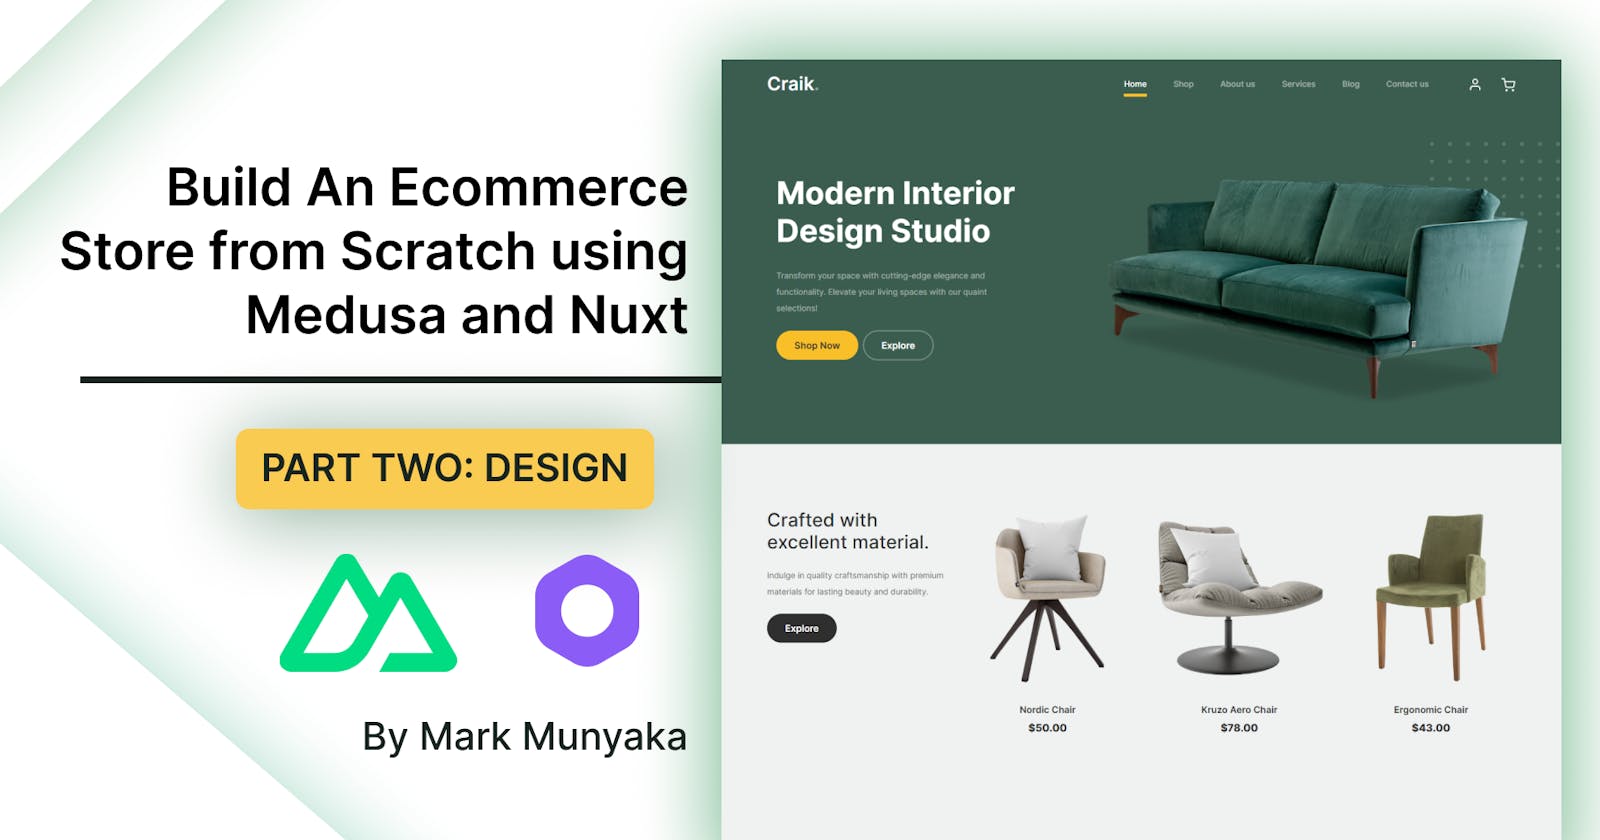 Build An Ecommerce Store from Scratch using Medusa and Nuxt: Part 02